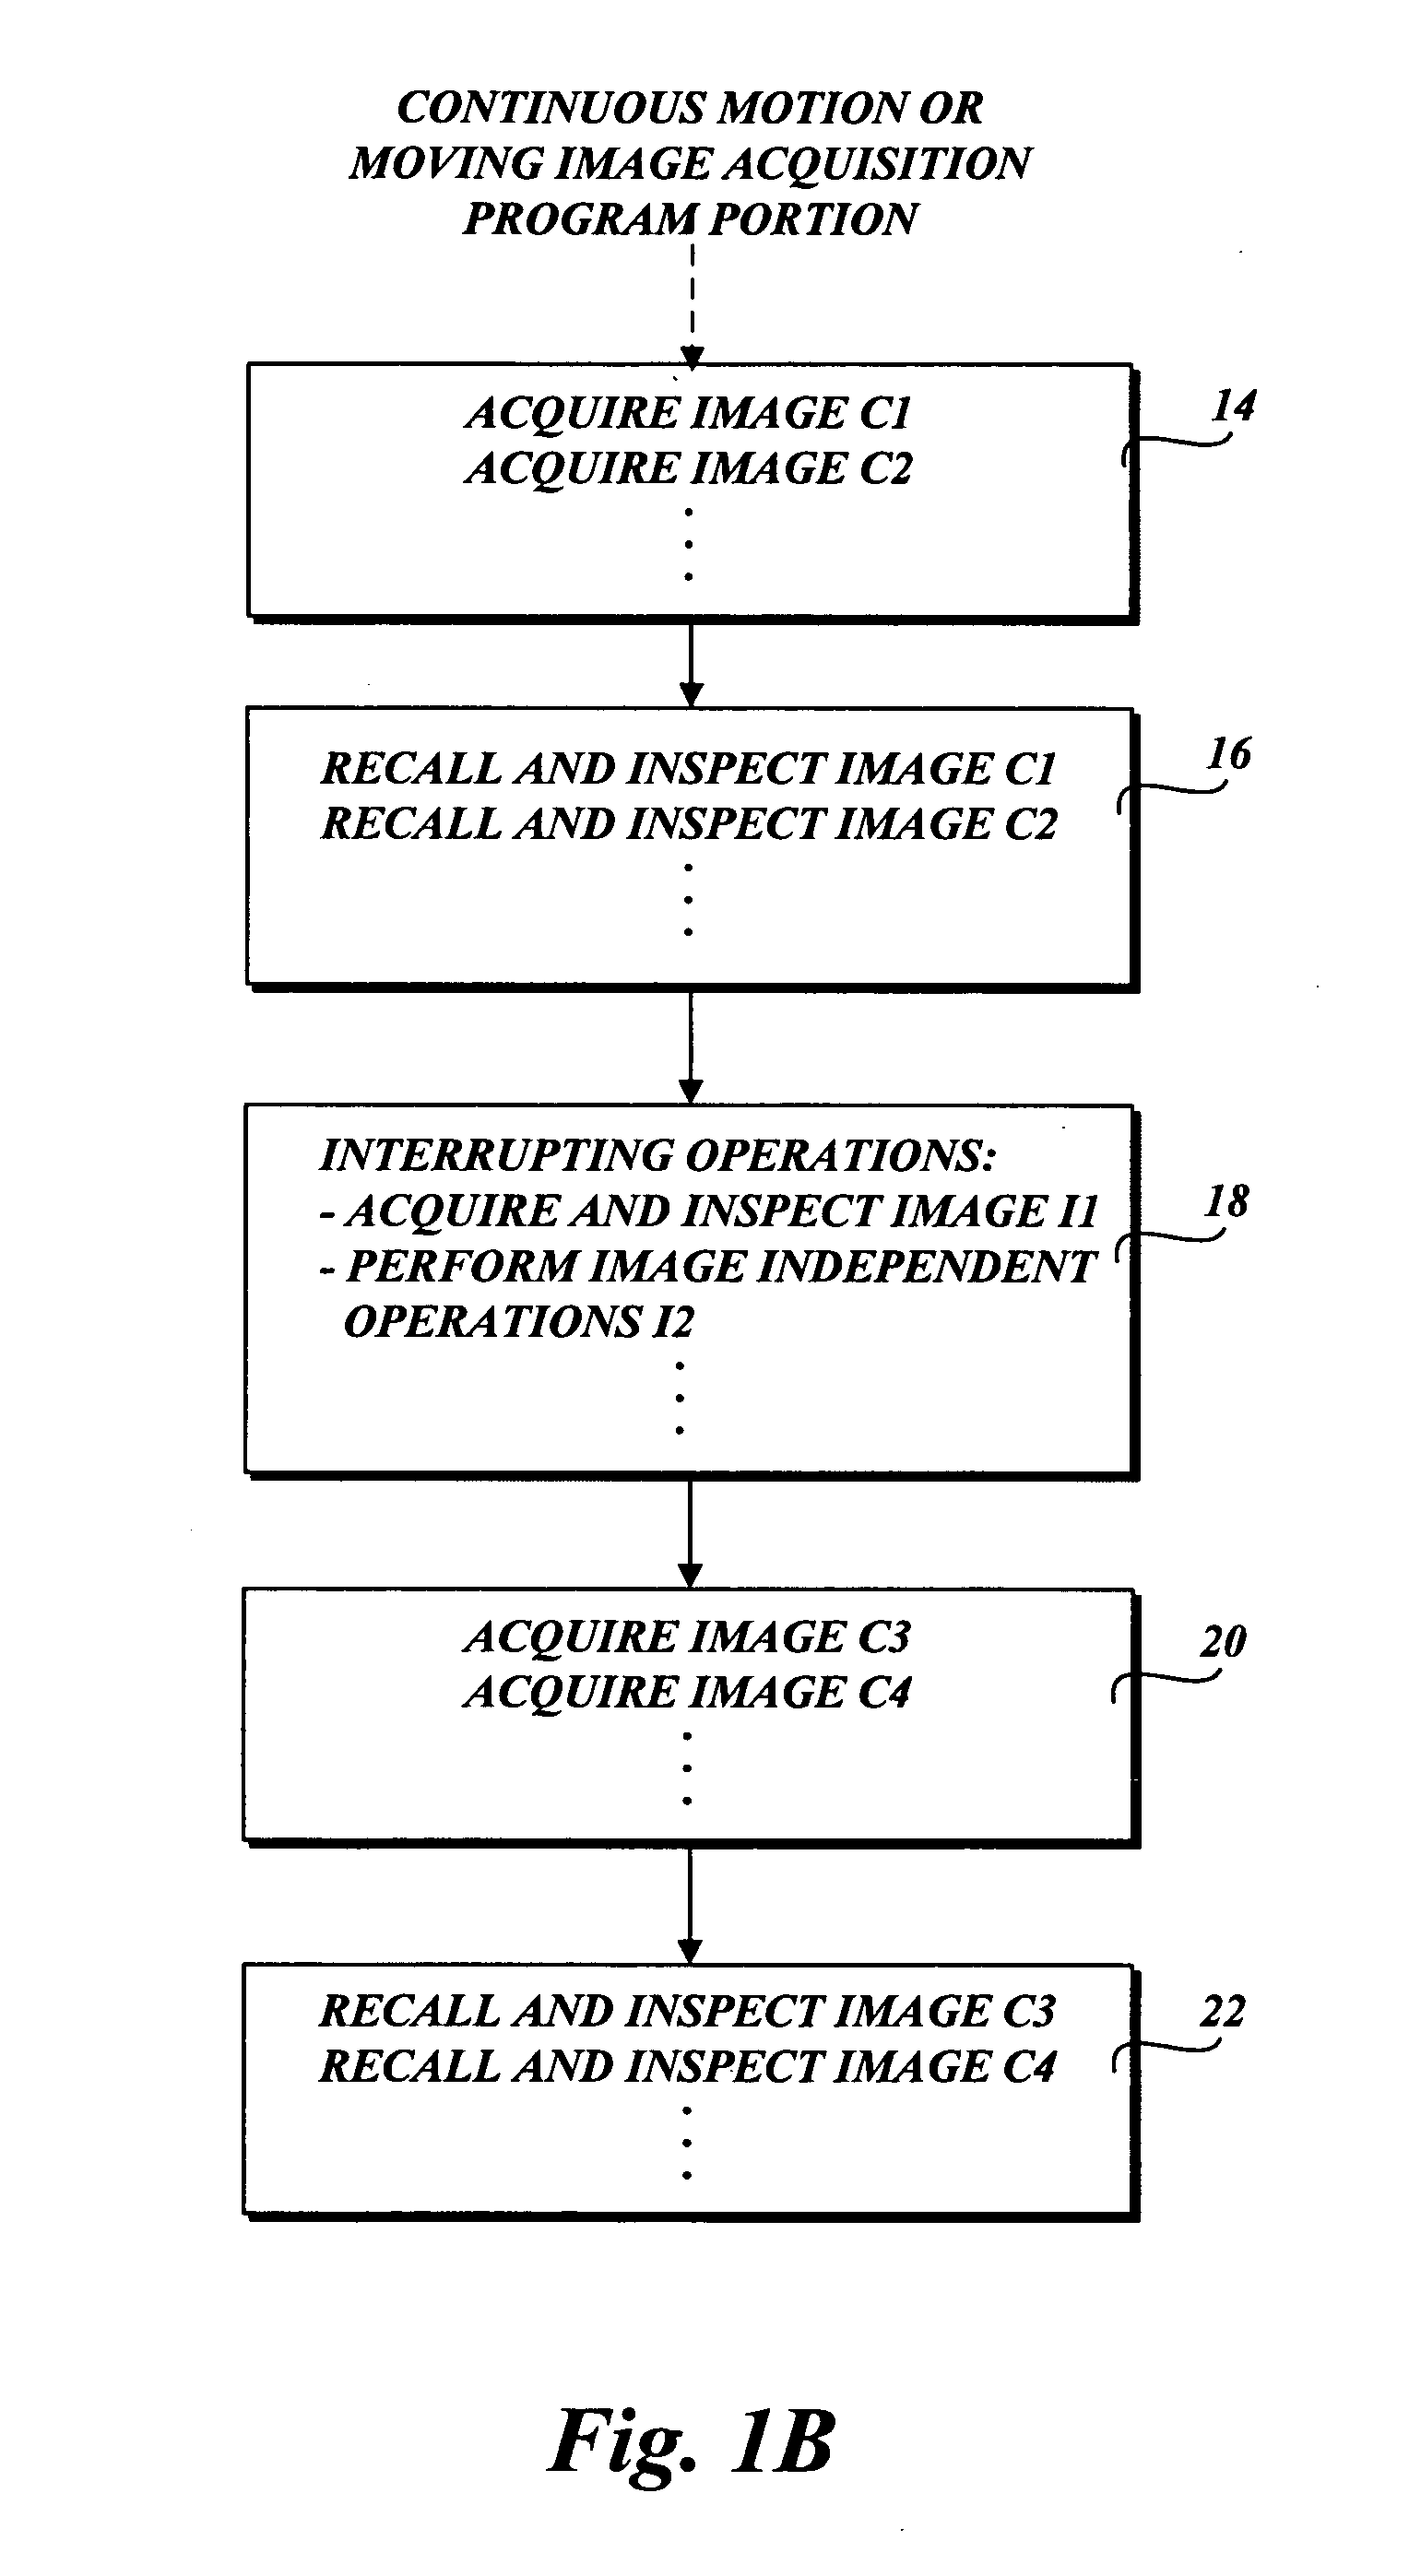 System and method for programming interrupting operations during moving image acquisition sequences in a vision system